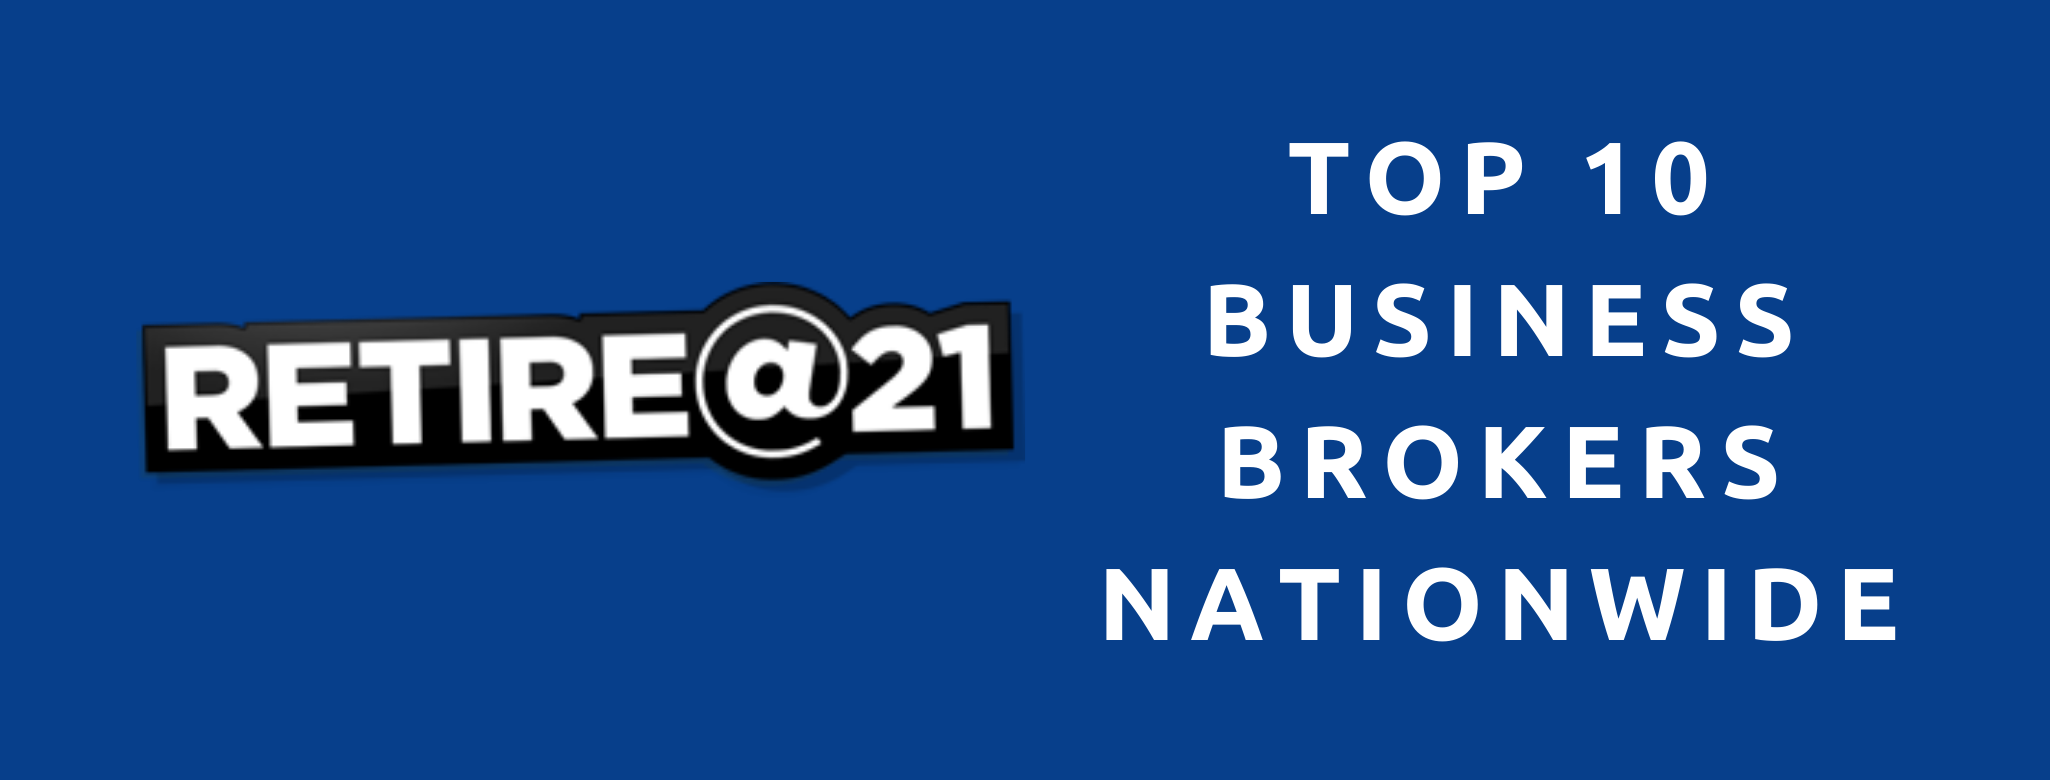 Retire at 21 top 10 business brokers nationwide